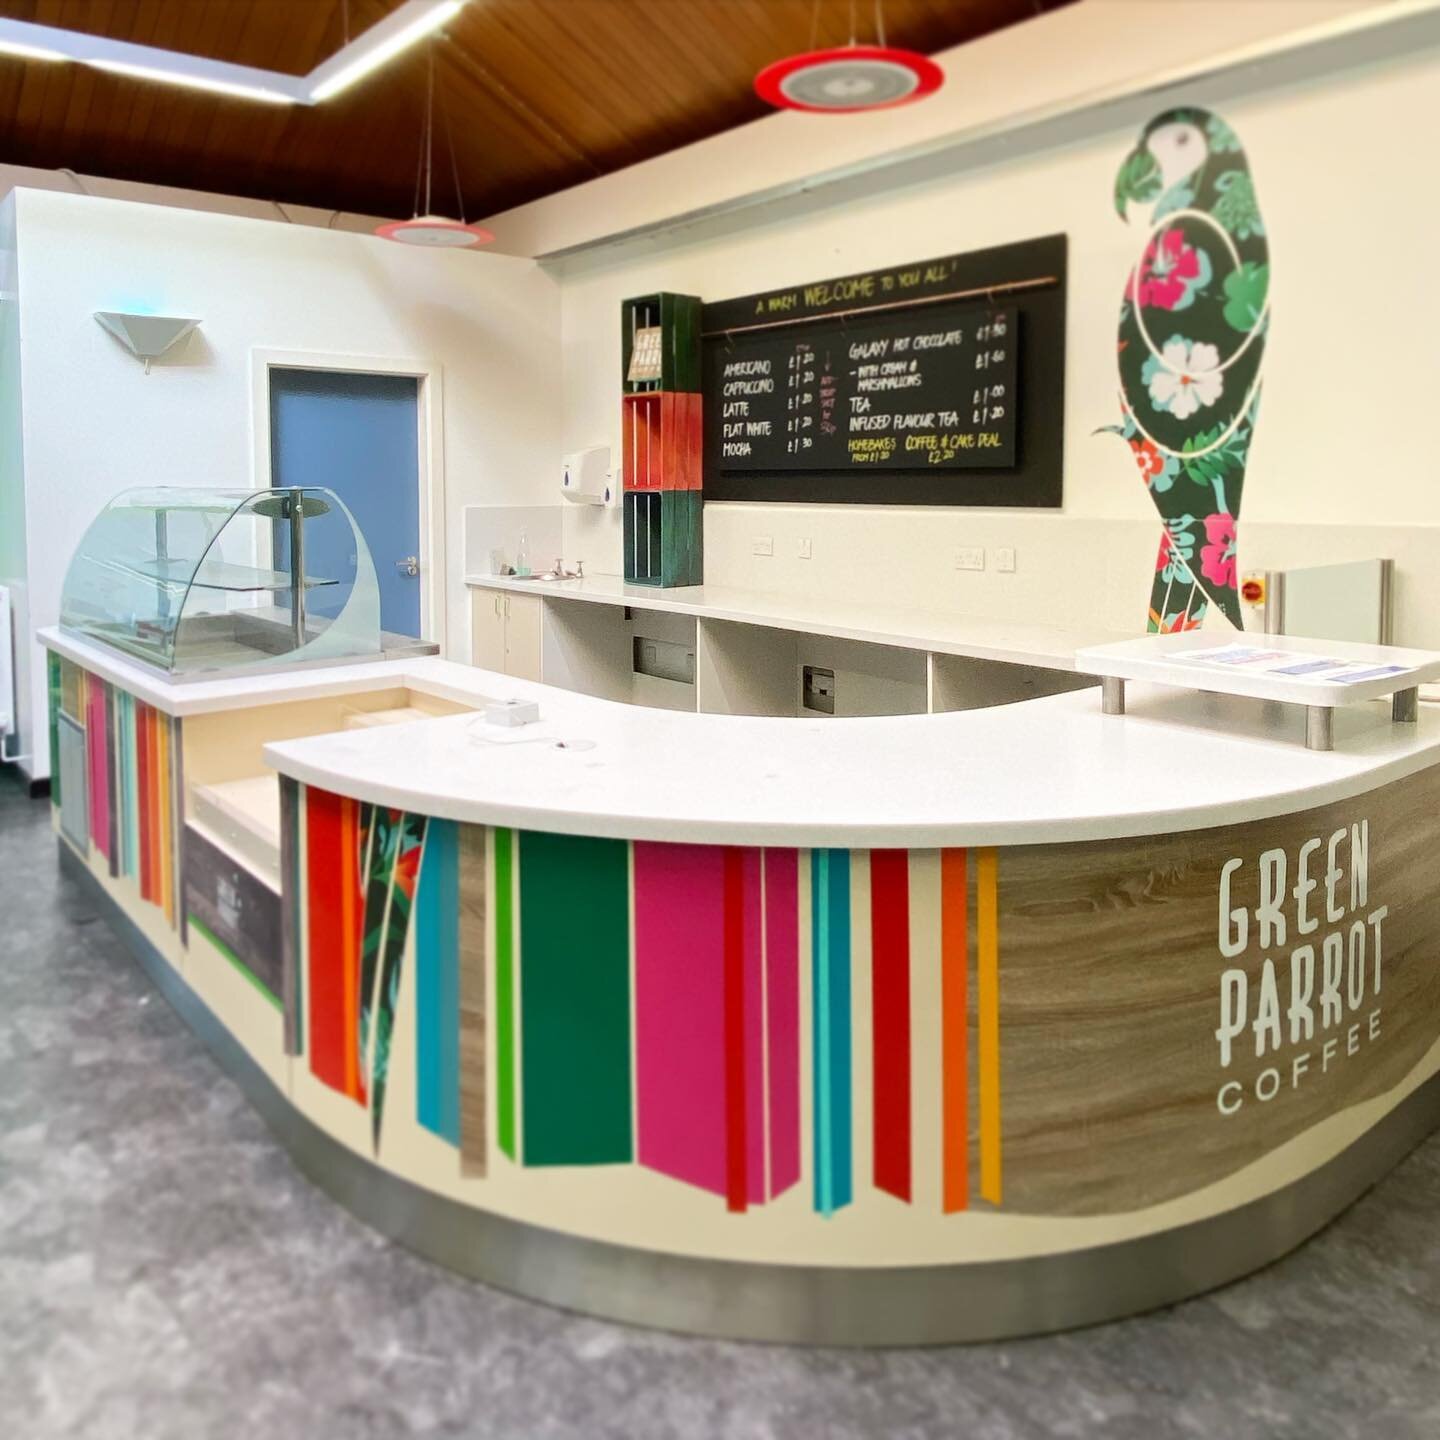 Another quick turnaround makeover of the Coffee Shop at King George V college in Southport. Making use of the beautifully designed atrium with bursts of colour. Taking the existing brand and breathing new life into the space. Quick, easy, cost effect